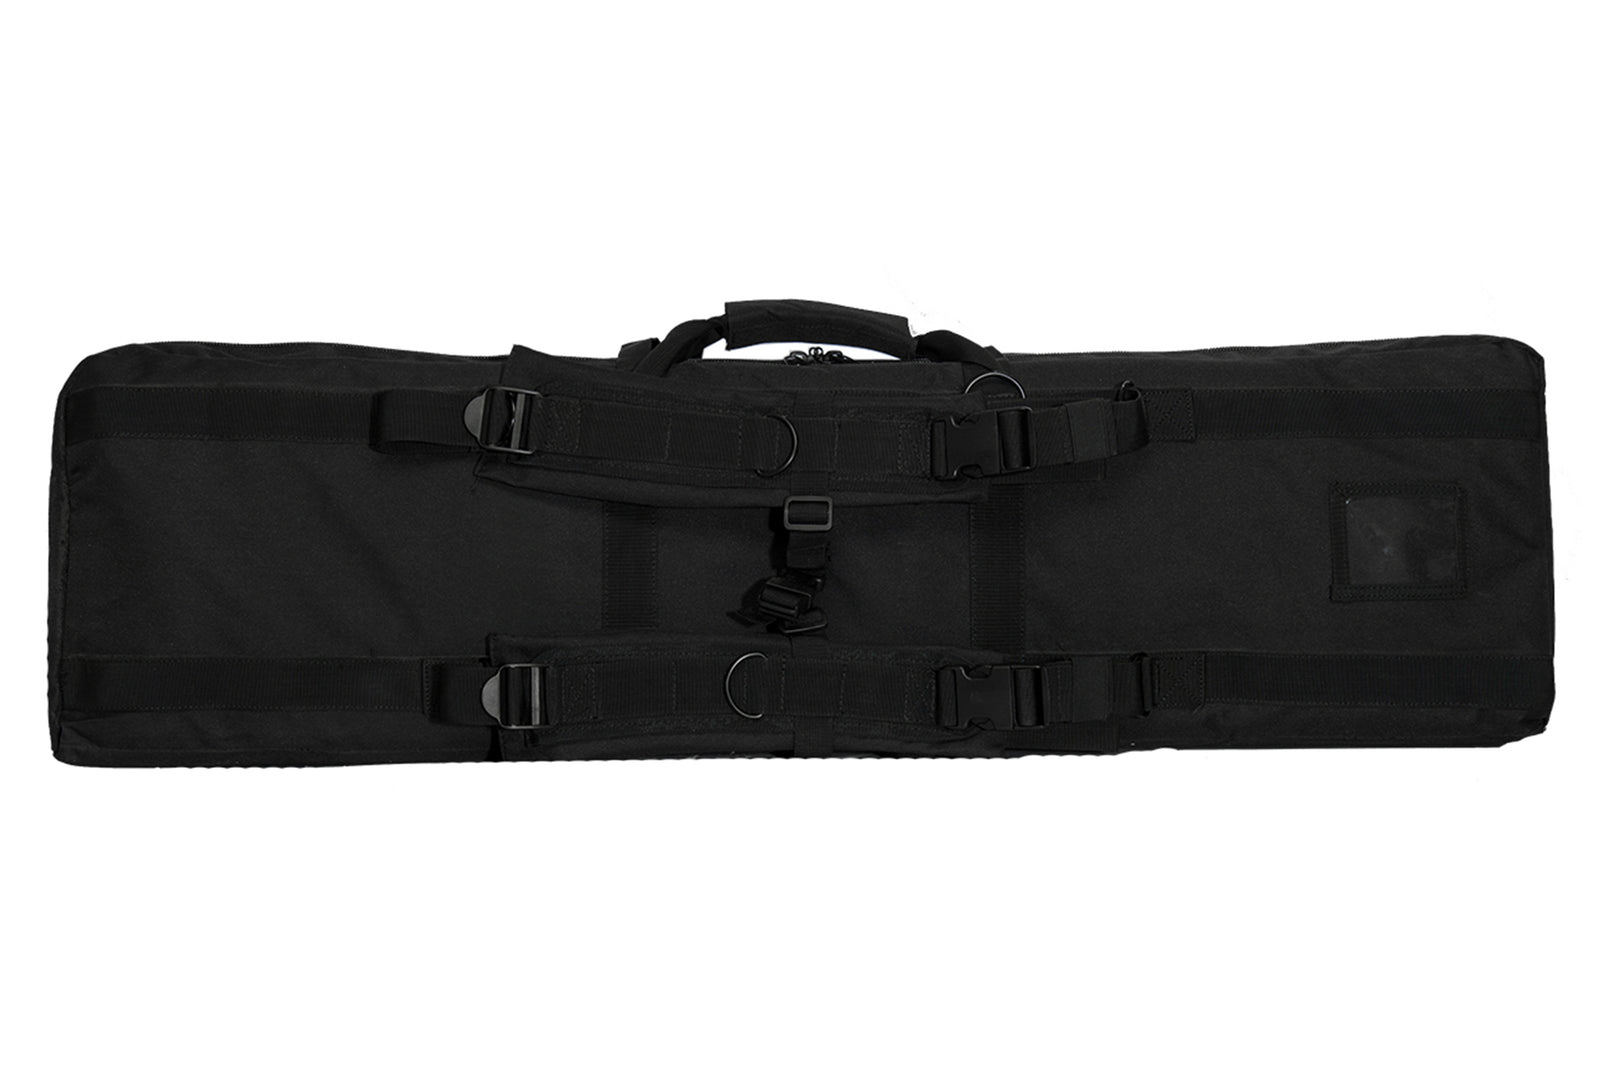 Lancer Tactical 42" Molle Ultimate Dual Weapon Case Rifle Bag